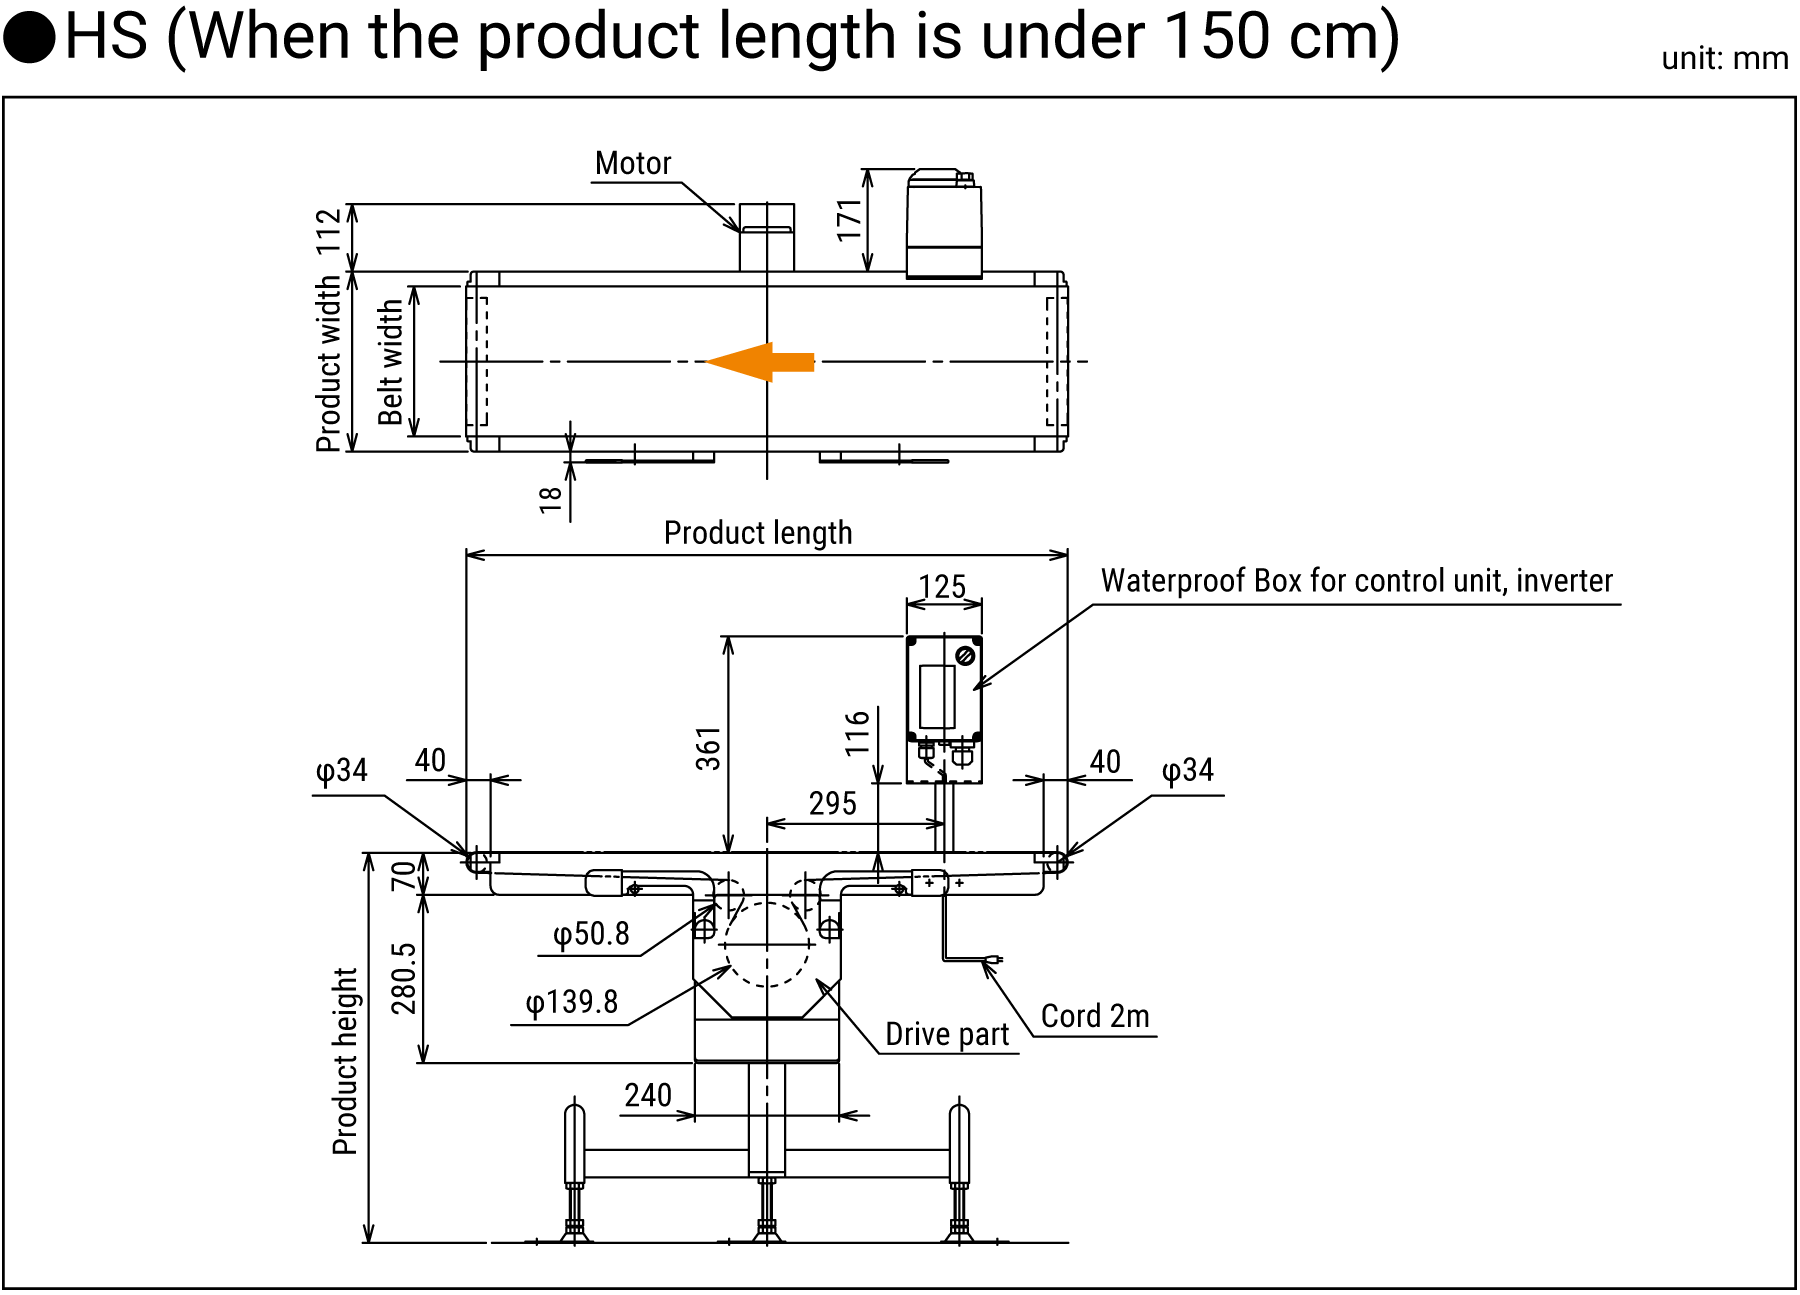 Dimensions HS(When the product length is under 150 cm)